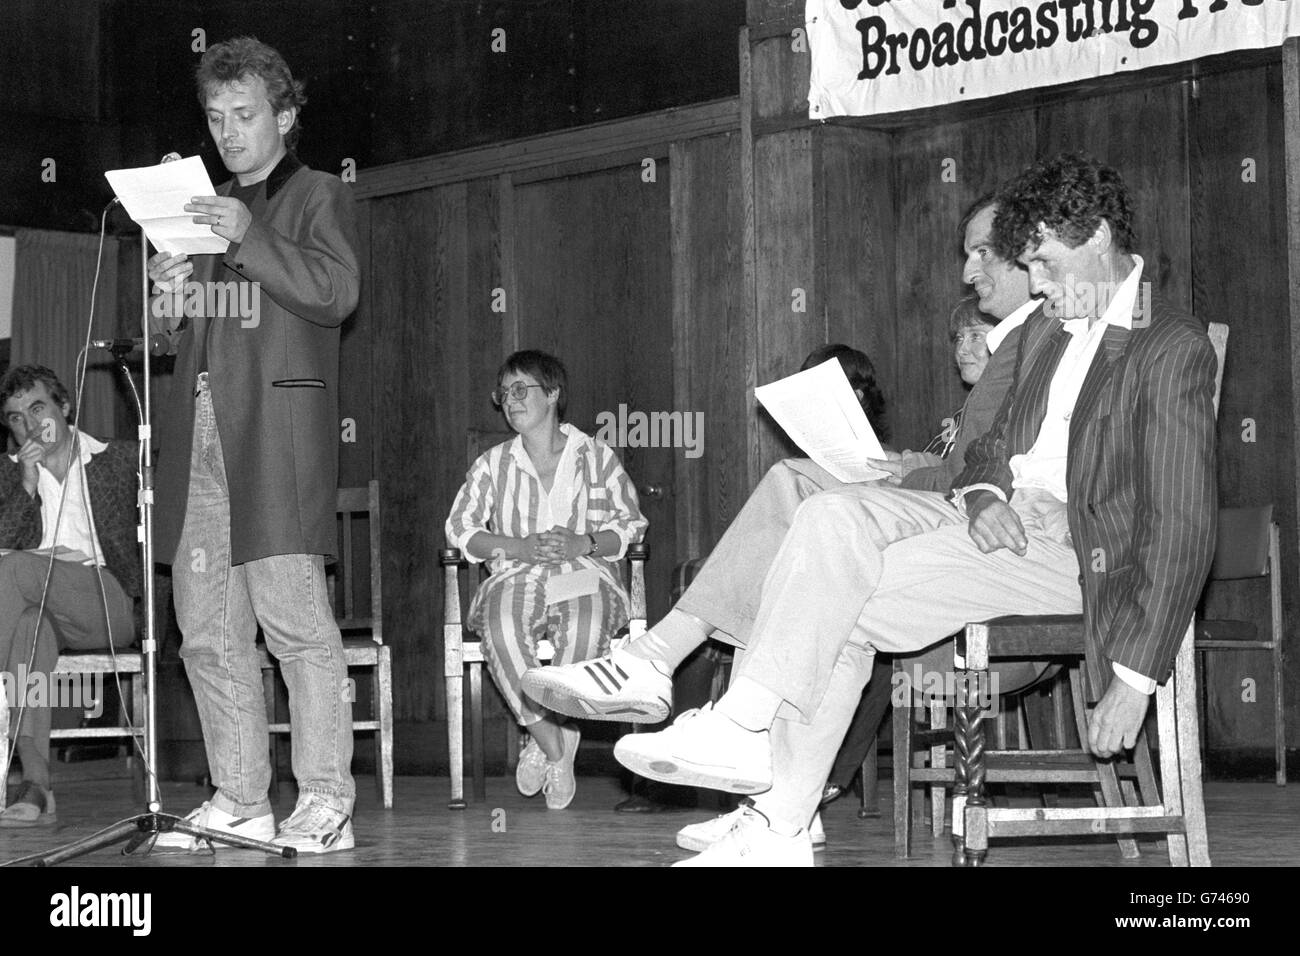 TV comedian Rik Mayall reads an extract from the banned Peter Wright book Spycatcher, at an event organised by the Campaign for Press and Broadcasting Freedom at Conway Hall in London. Former Monty Python member Michael Palin is seated on the right. Stock Photo